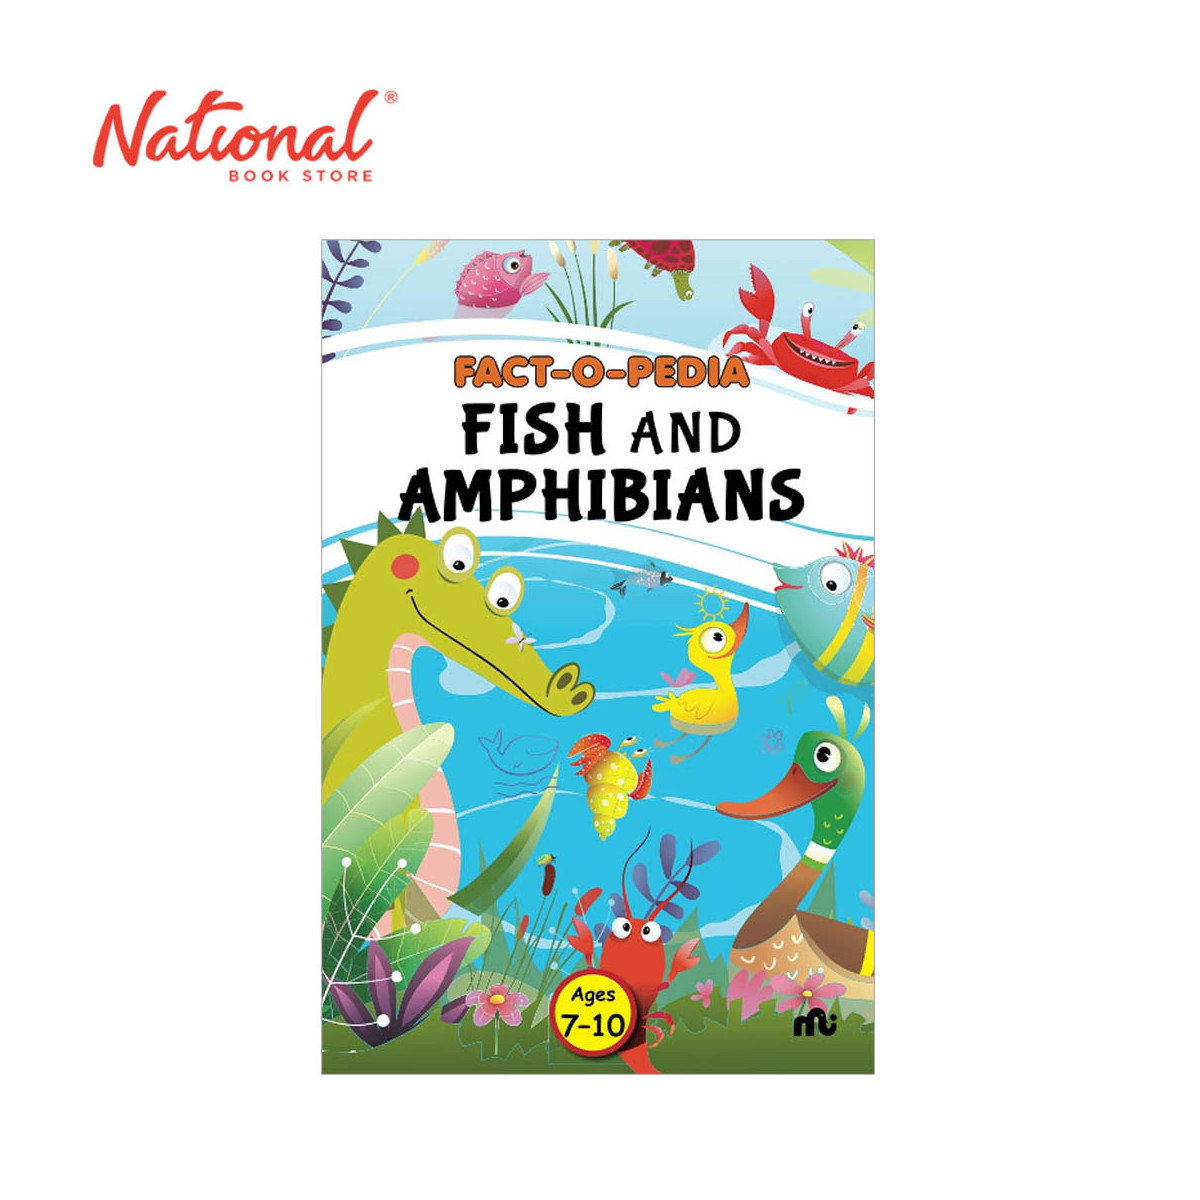 Fact-O-Pedia Fish And Amphibians - Trade Paperback - Children's Reference